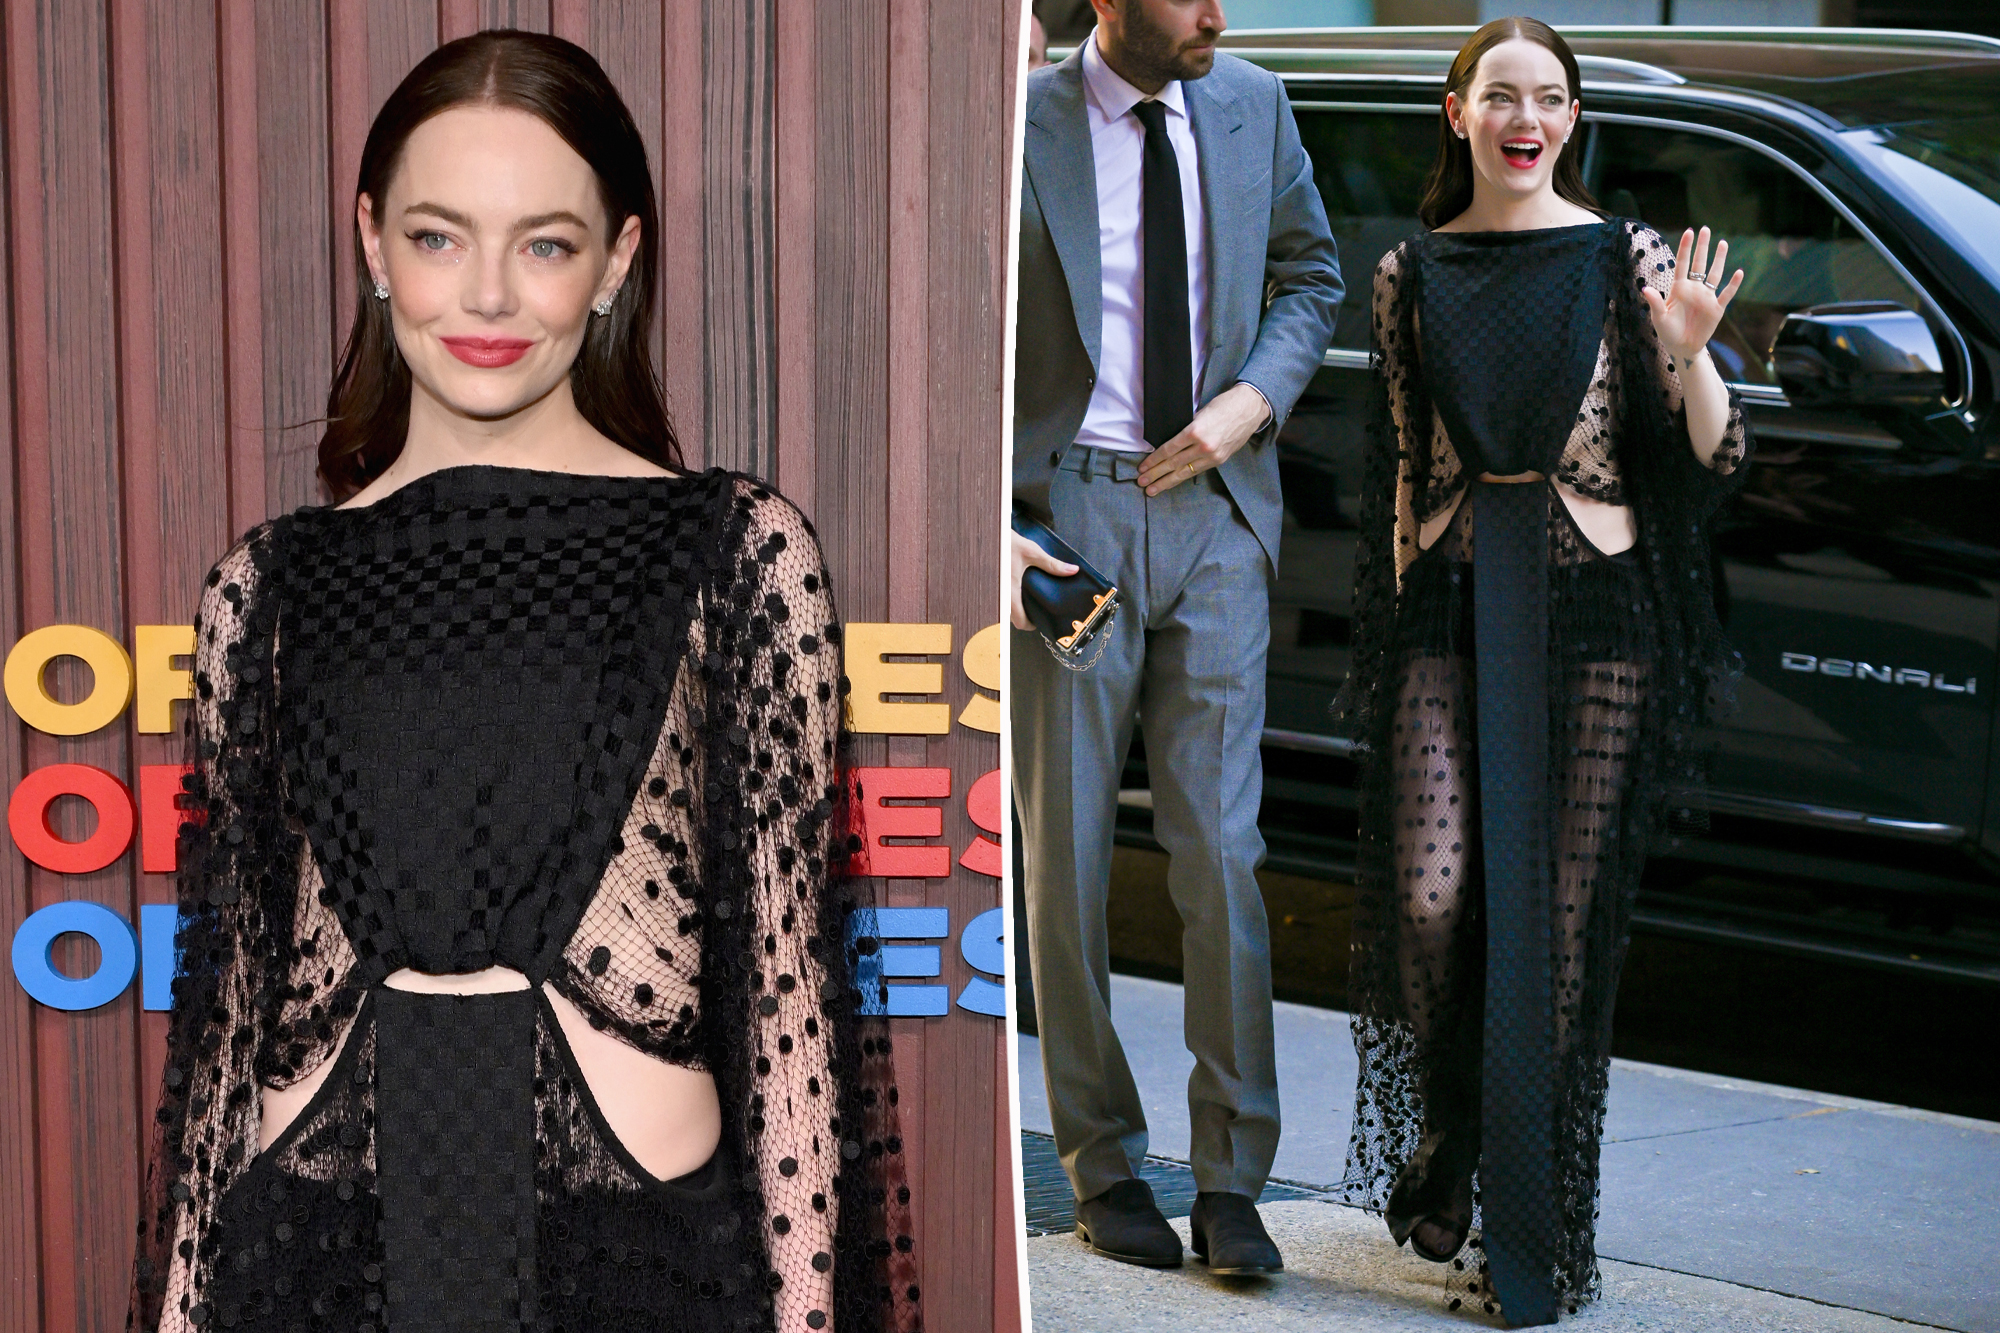 Emma Stone's Dazzling Sheer Black Dress Steals the Show at NYC Premiere